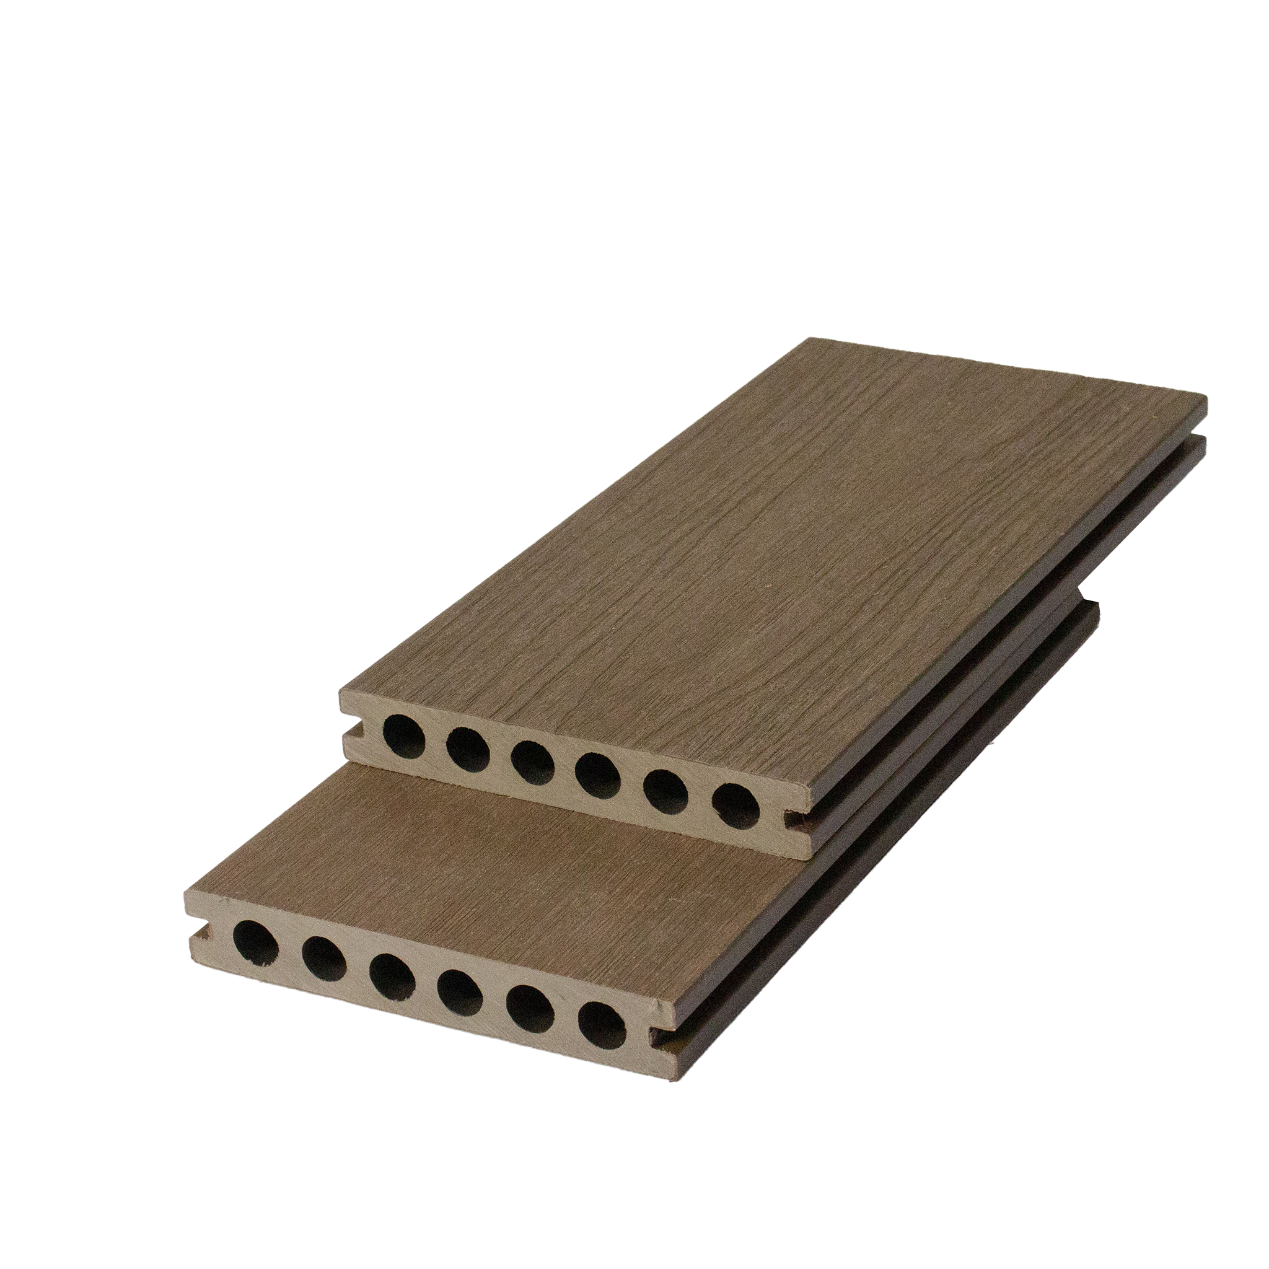 Co-Extrusion Hollow Composite Decking 138H22.5- Advanced Technology -Outdoor WPC Capped Decking